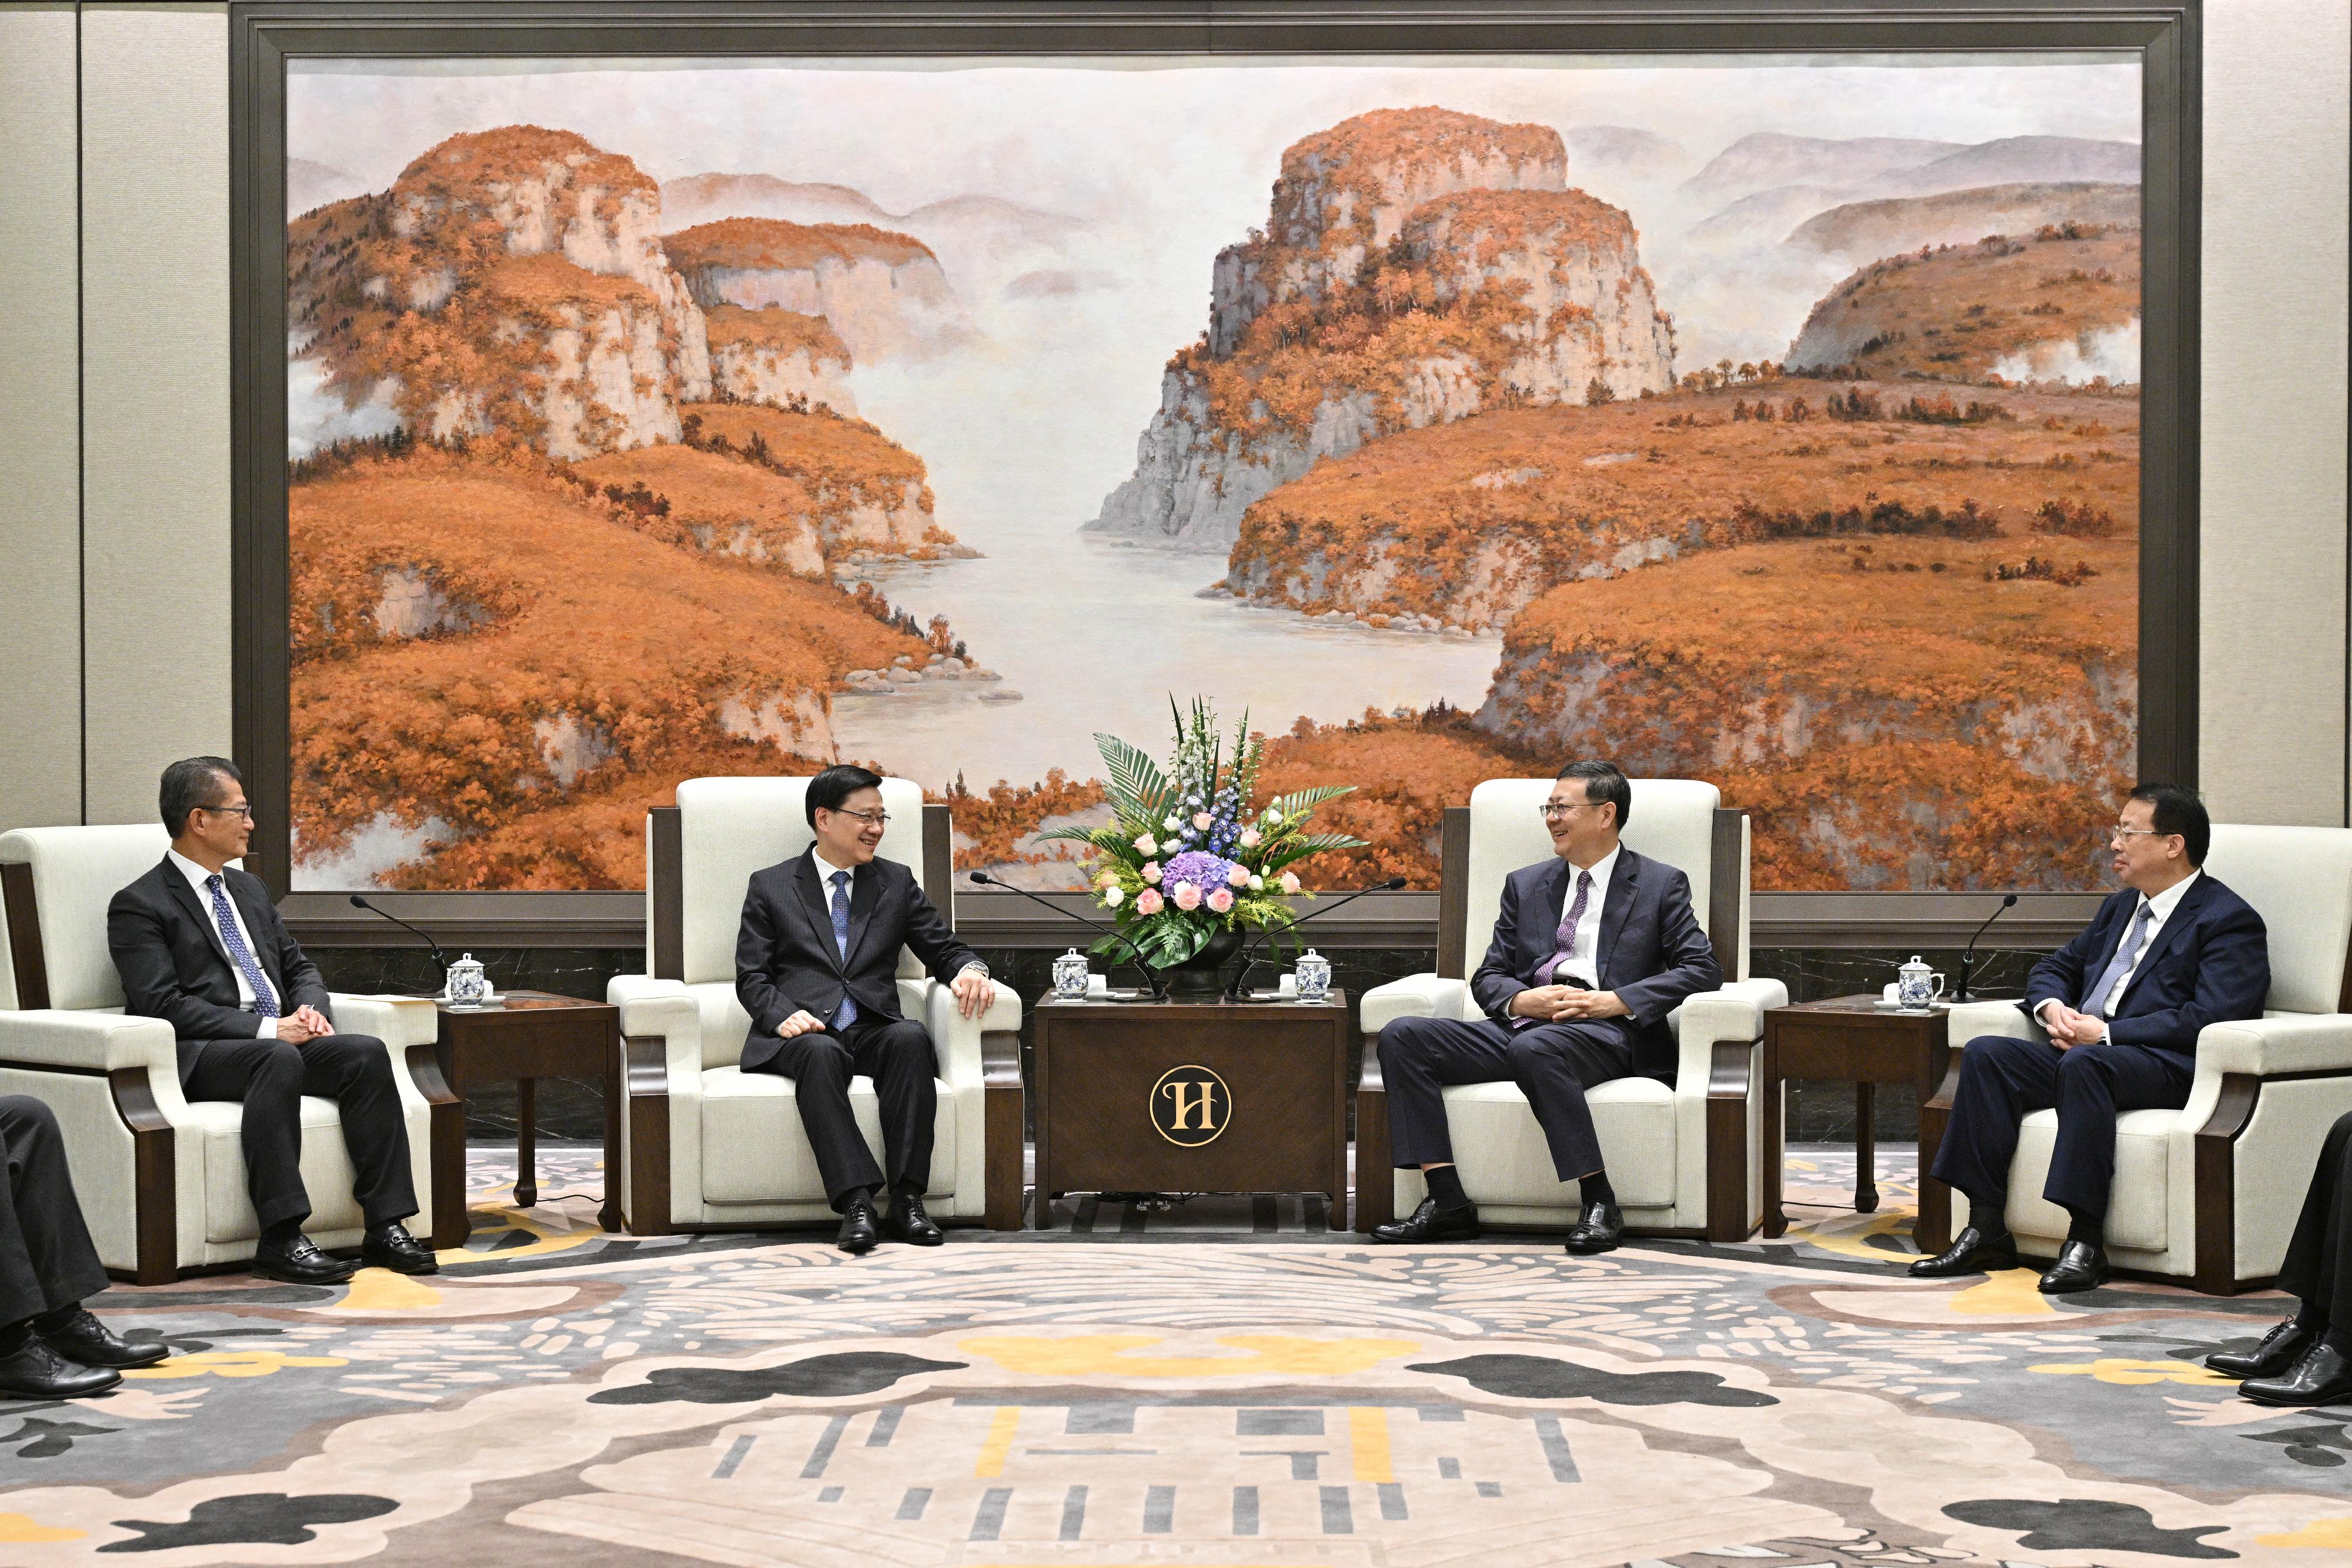 The Chief Executive, Mr John Lee (second left), meets with the Secretary of the CPC Shanghai Municipal Committee, Mr Chen Jining (second right), and the Mayor of Shanghai, Mr Gong Zheng (first right) in Shanghai today (November 4). The Financial Secretary, Mr Paul Chan (first left), also attended.